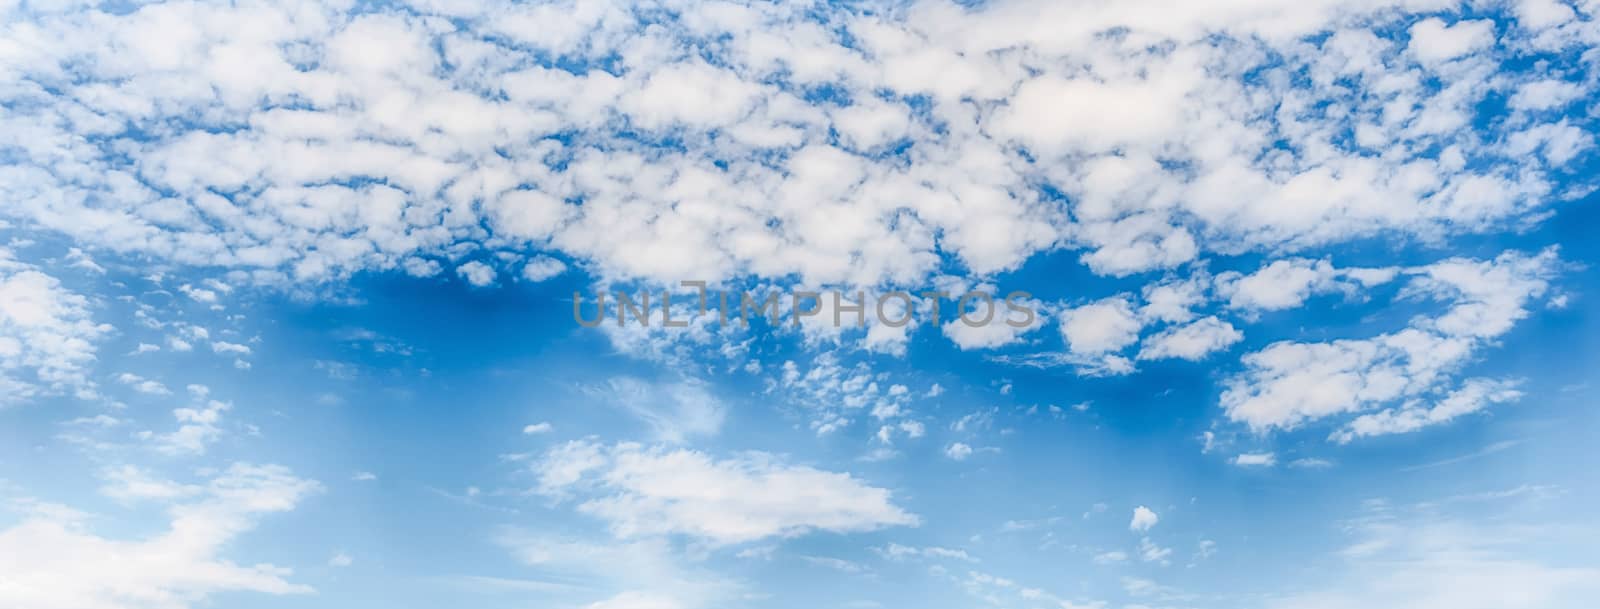 Dramatic blue sky with scenic clouds texture with copy space, may be used as background